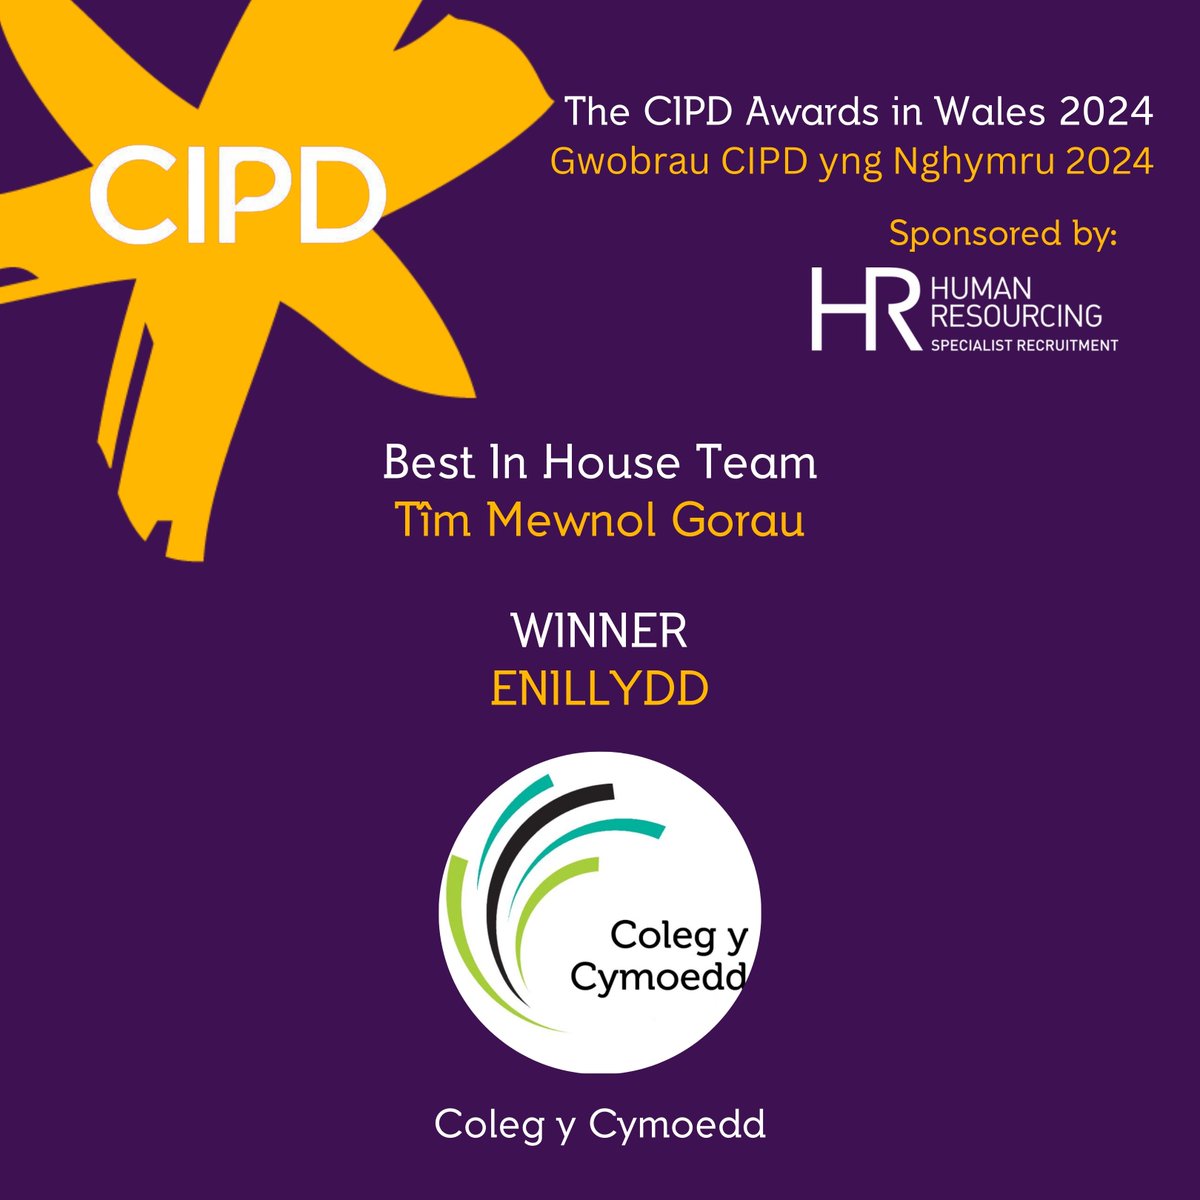 🎉We extend our warmest congratulations to Coleg y Cymoedd for winning the Best In-House Team award! Well done on this outstanding achievement! 🌟 #cipdwalesawards2024 #yourtimetoshine #dyamserddisglerio